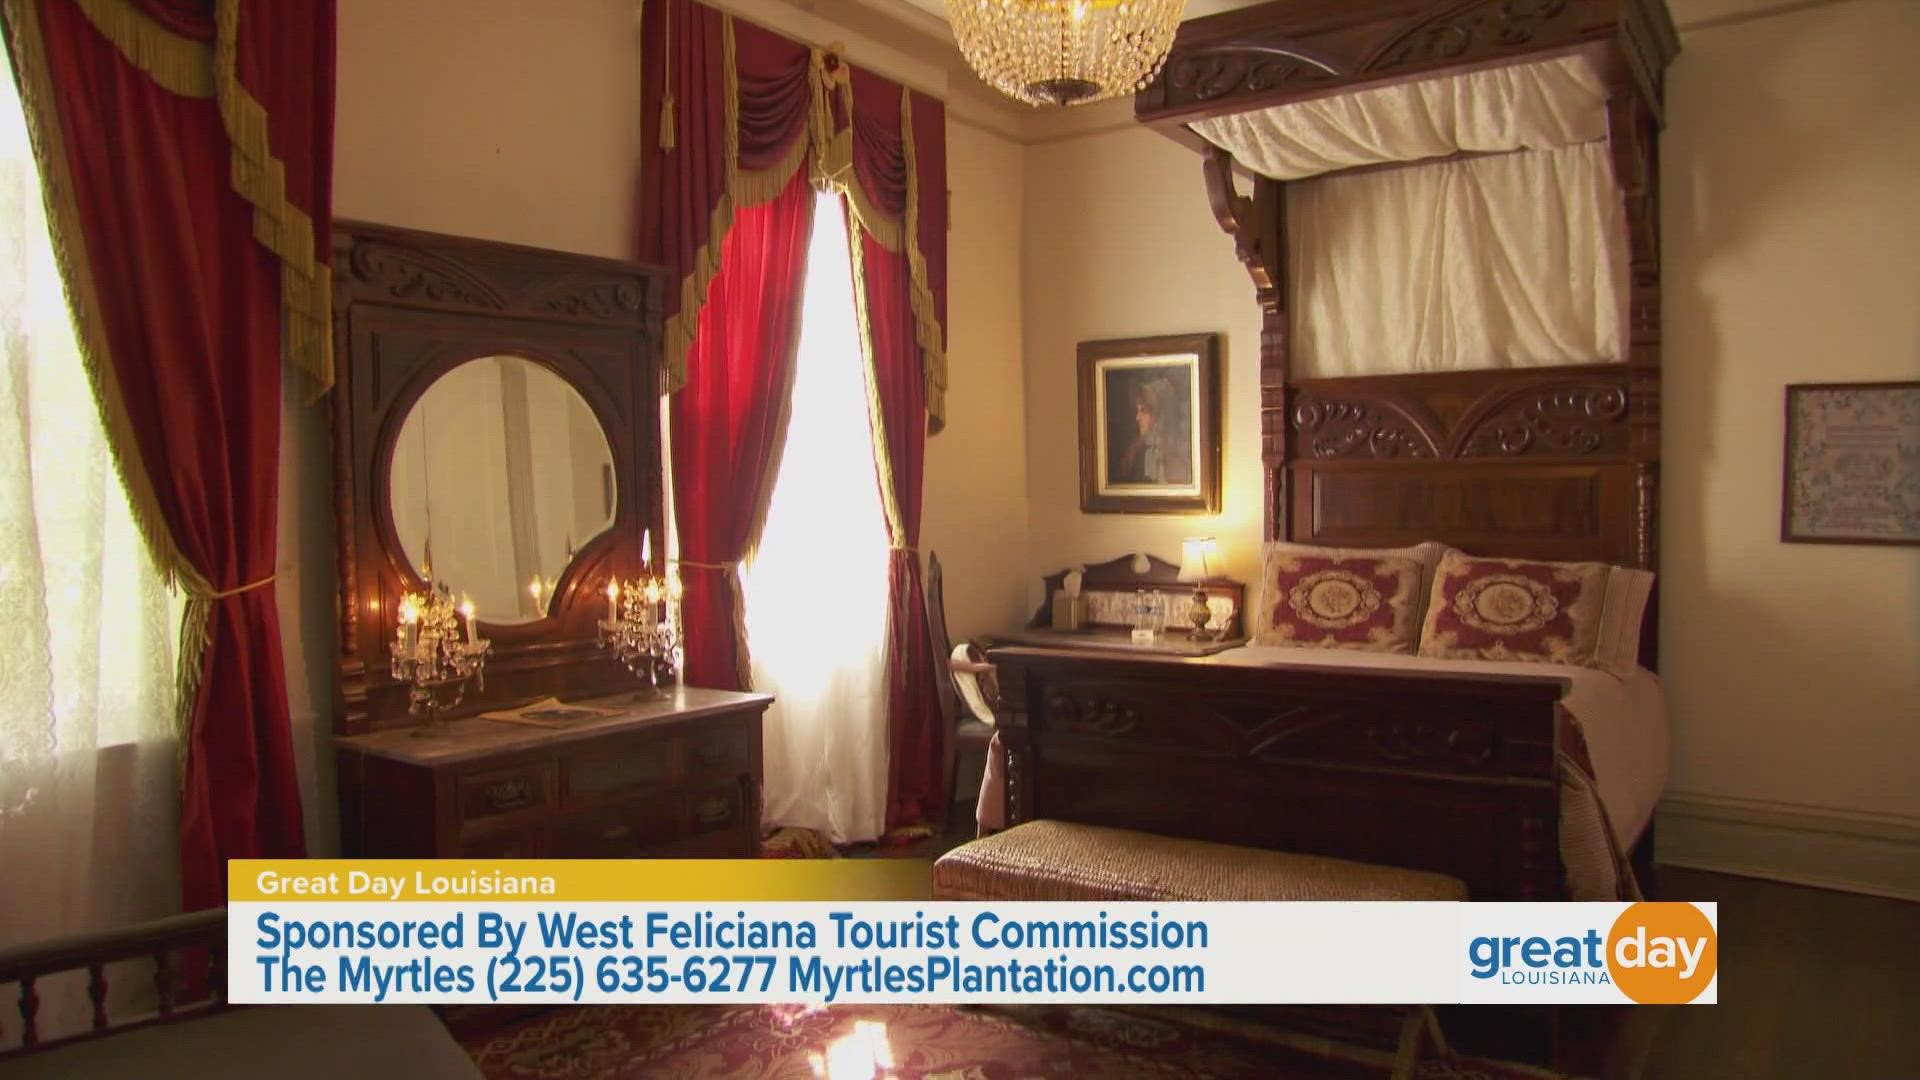 The Myrtles Plantation is rich in history and ghost stories, and is known as one of the most haunted homes in America.